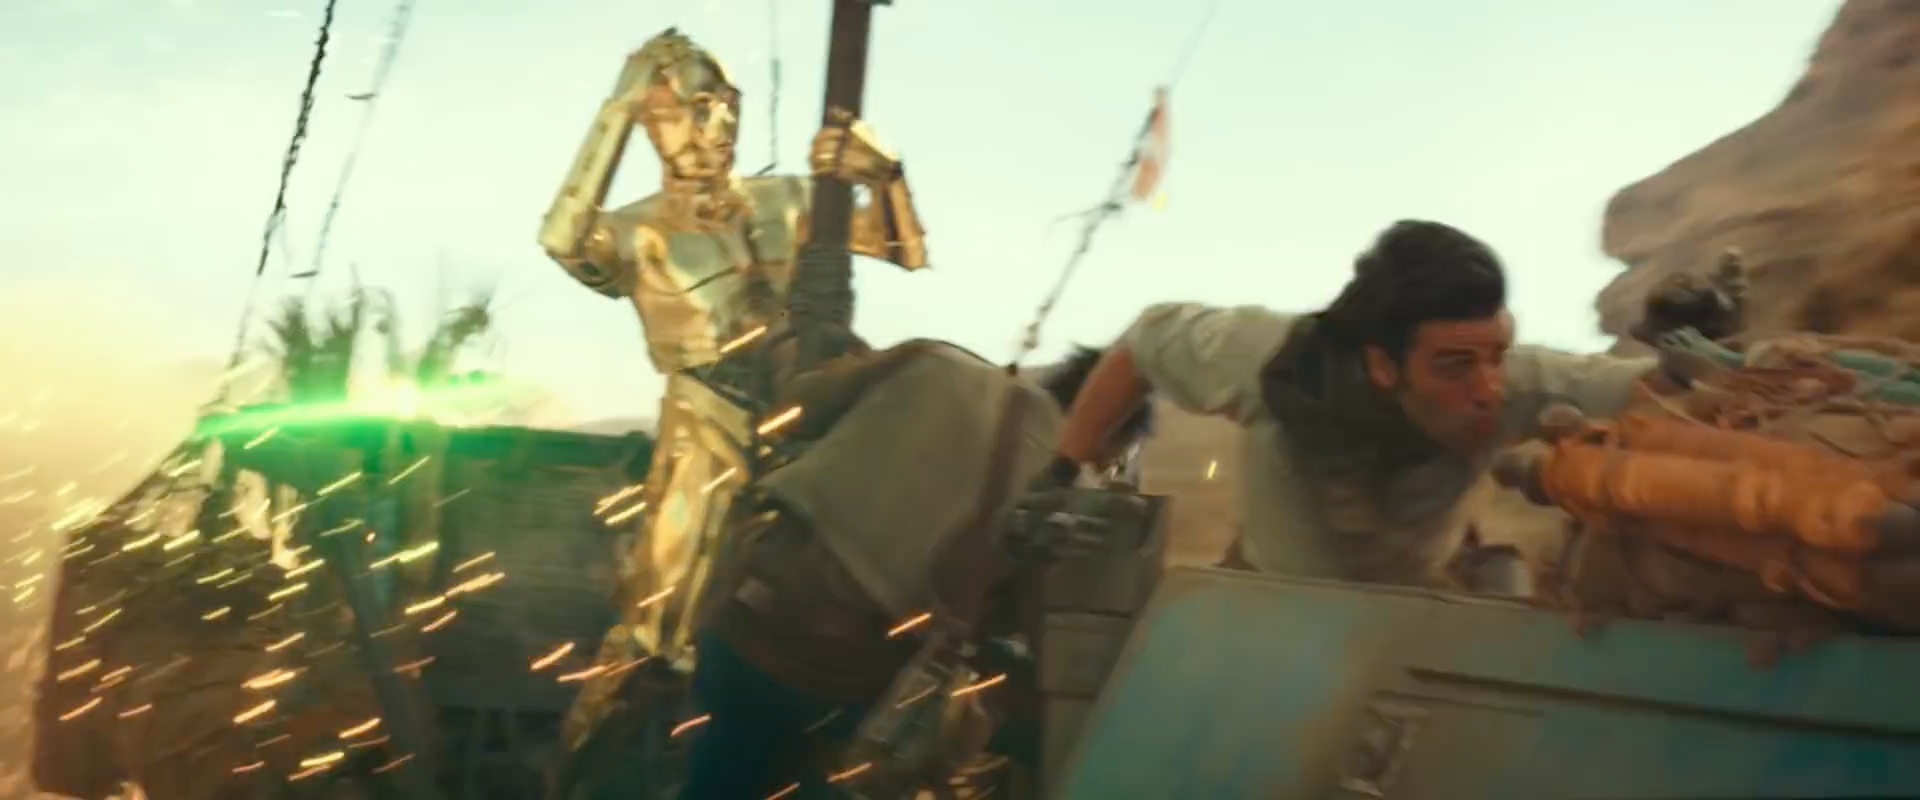 Speeder piloted by Poe and Finn, with C-3PO